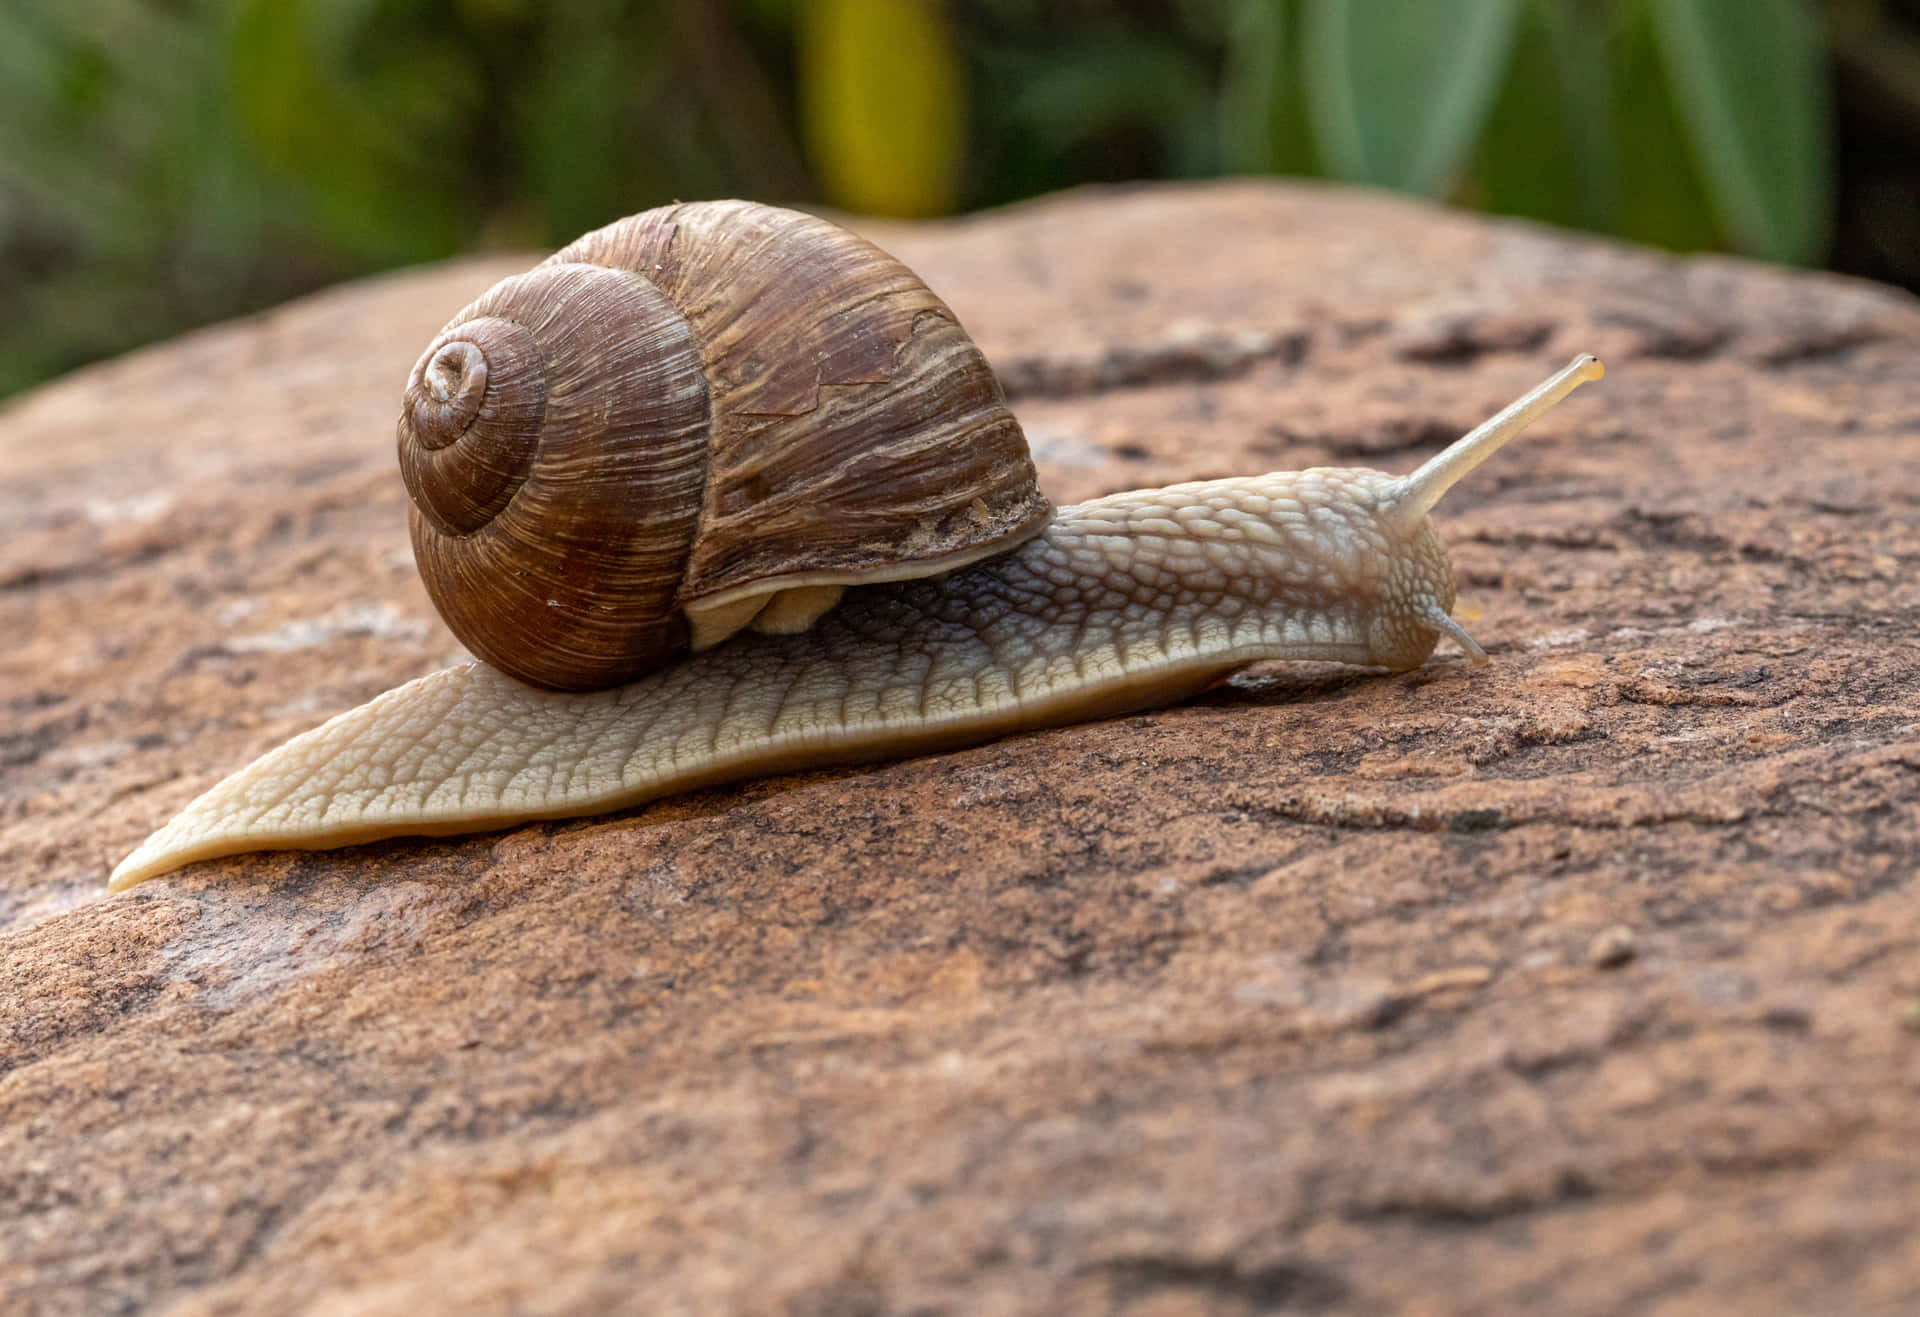 A slow and steady Snail that knows exactly where it's going